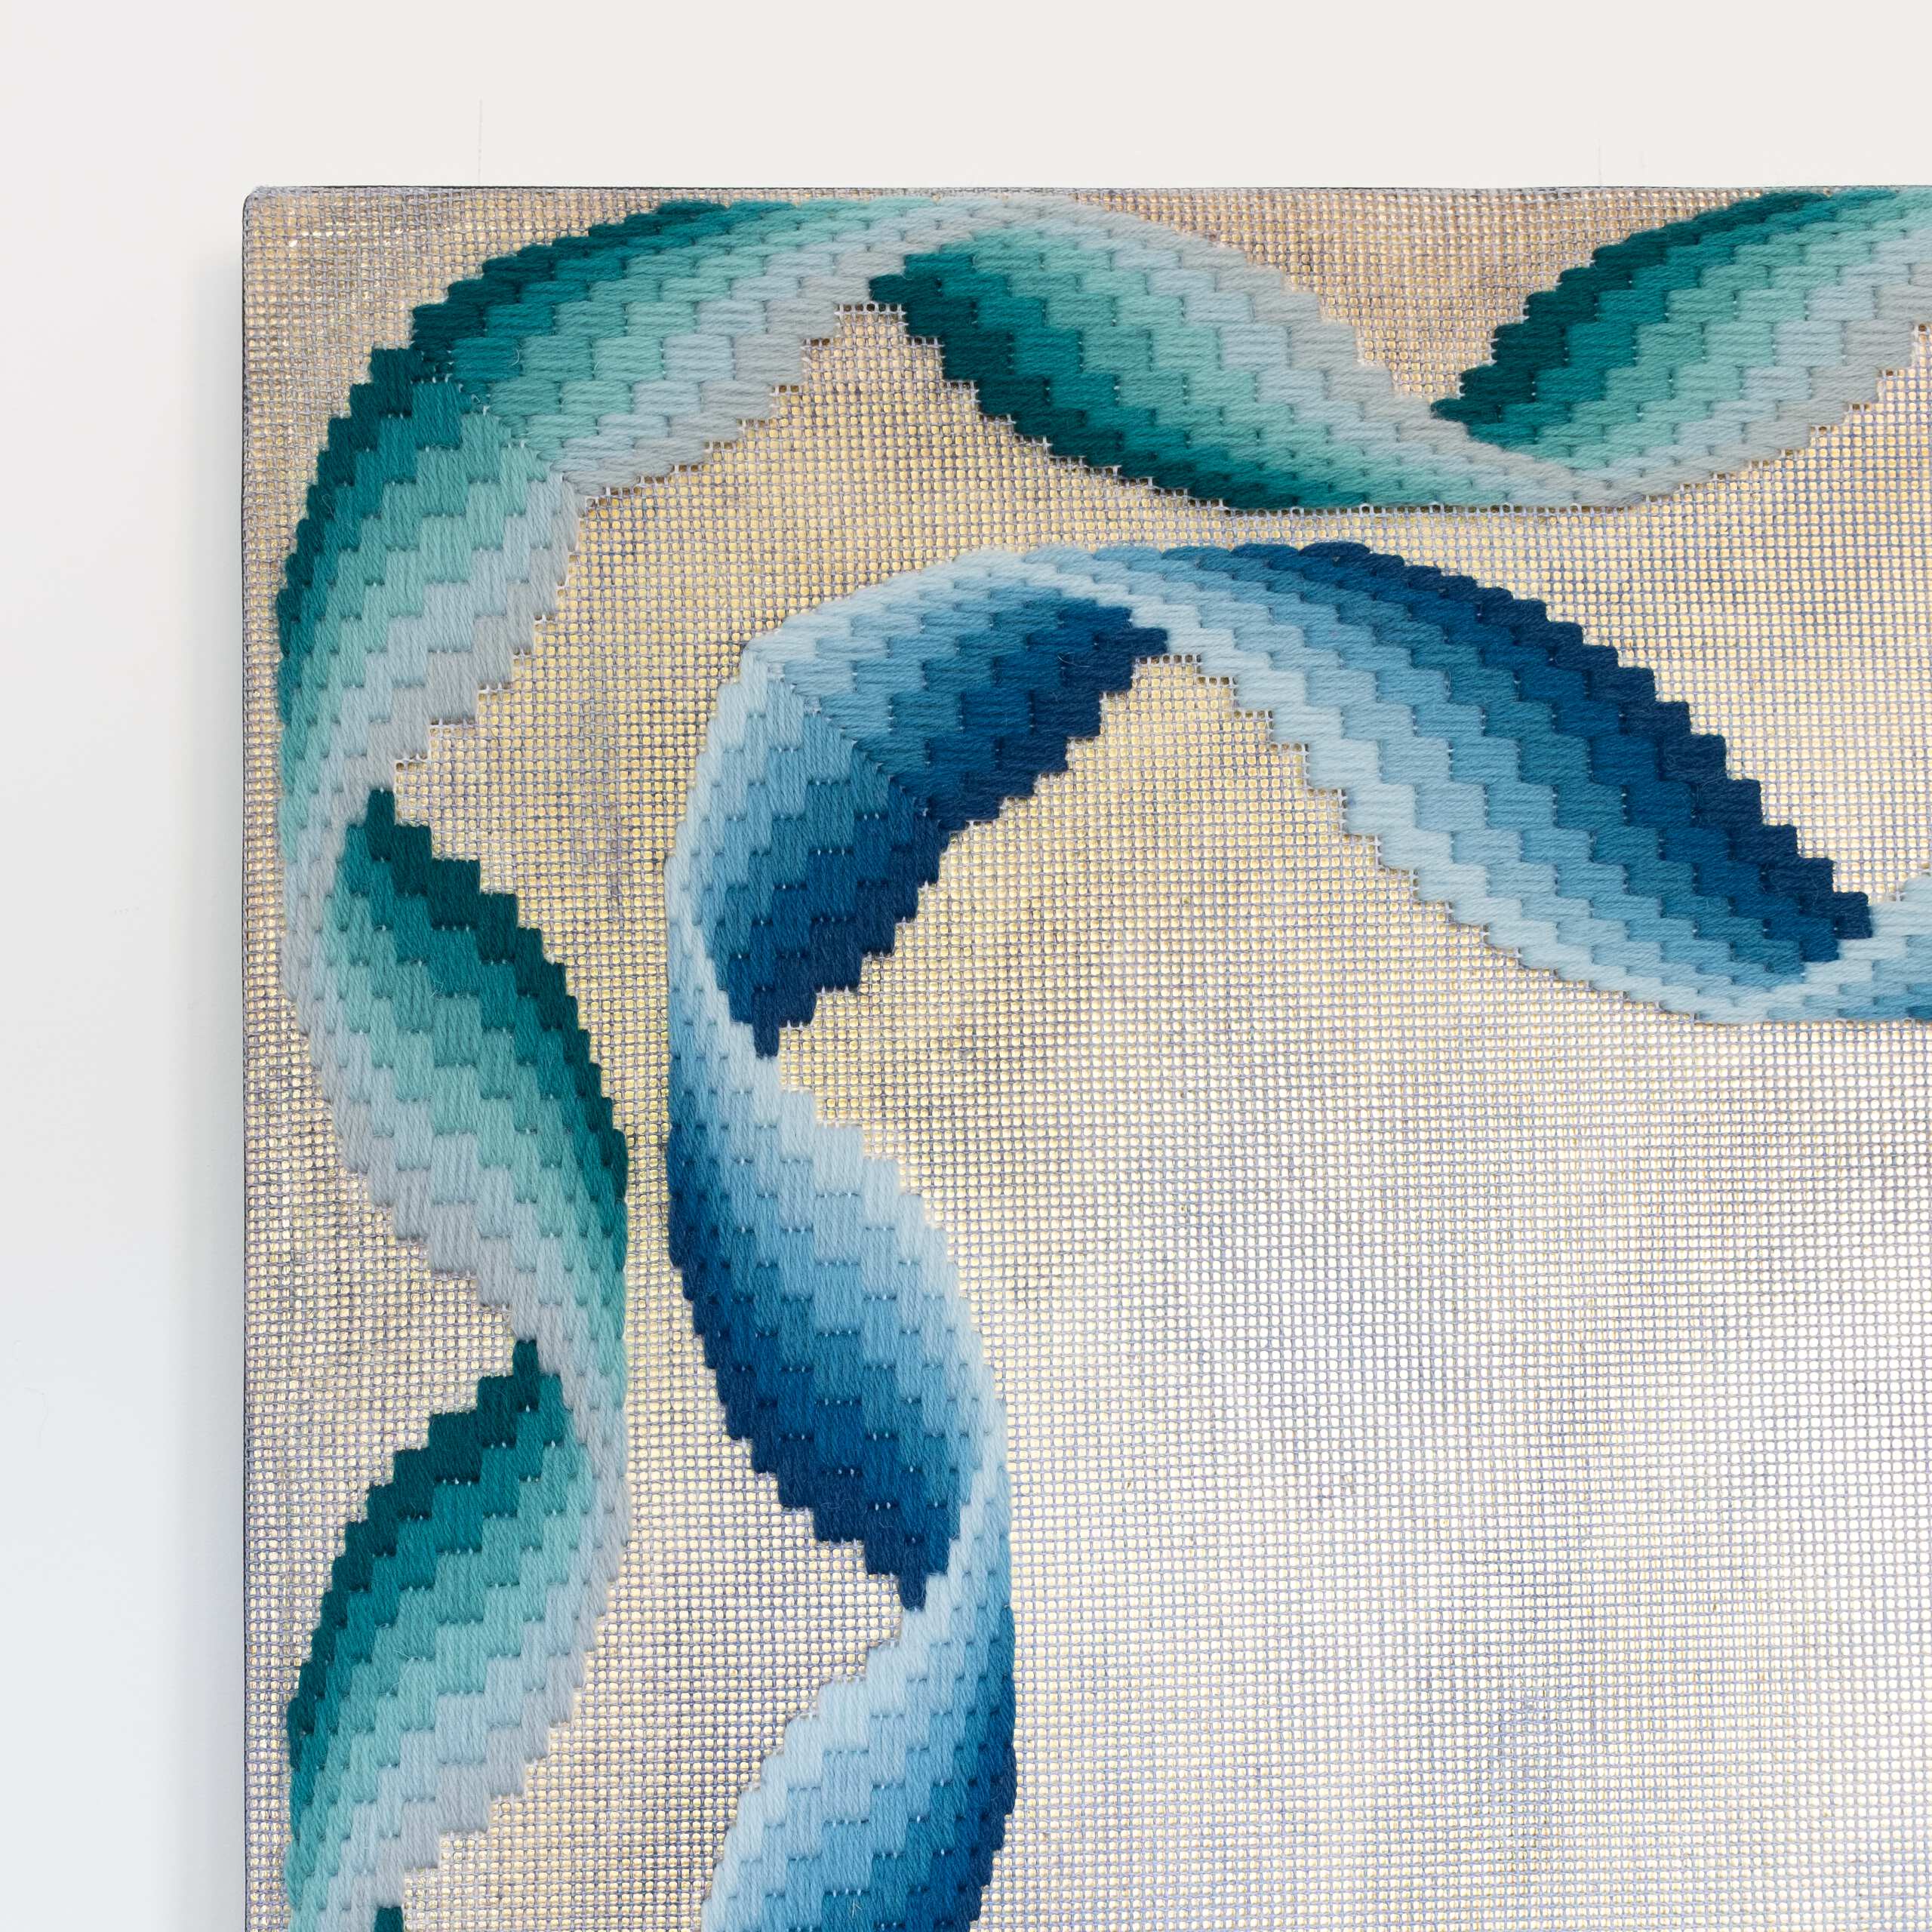 Water Matter (Earth series), Hand-embroidered wool on canvas over panel with gold leaf, 2019